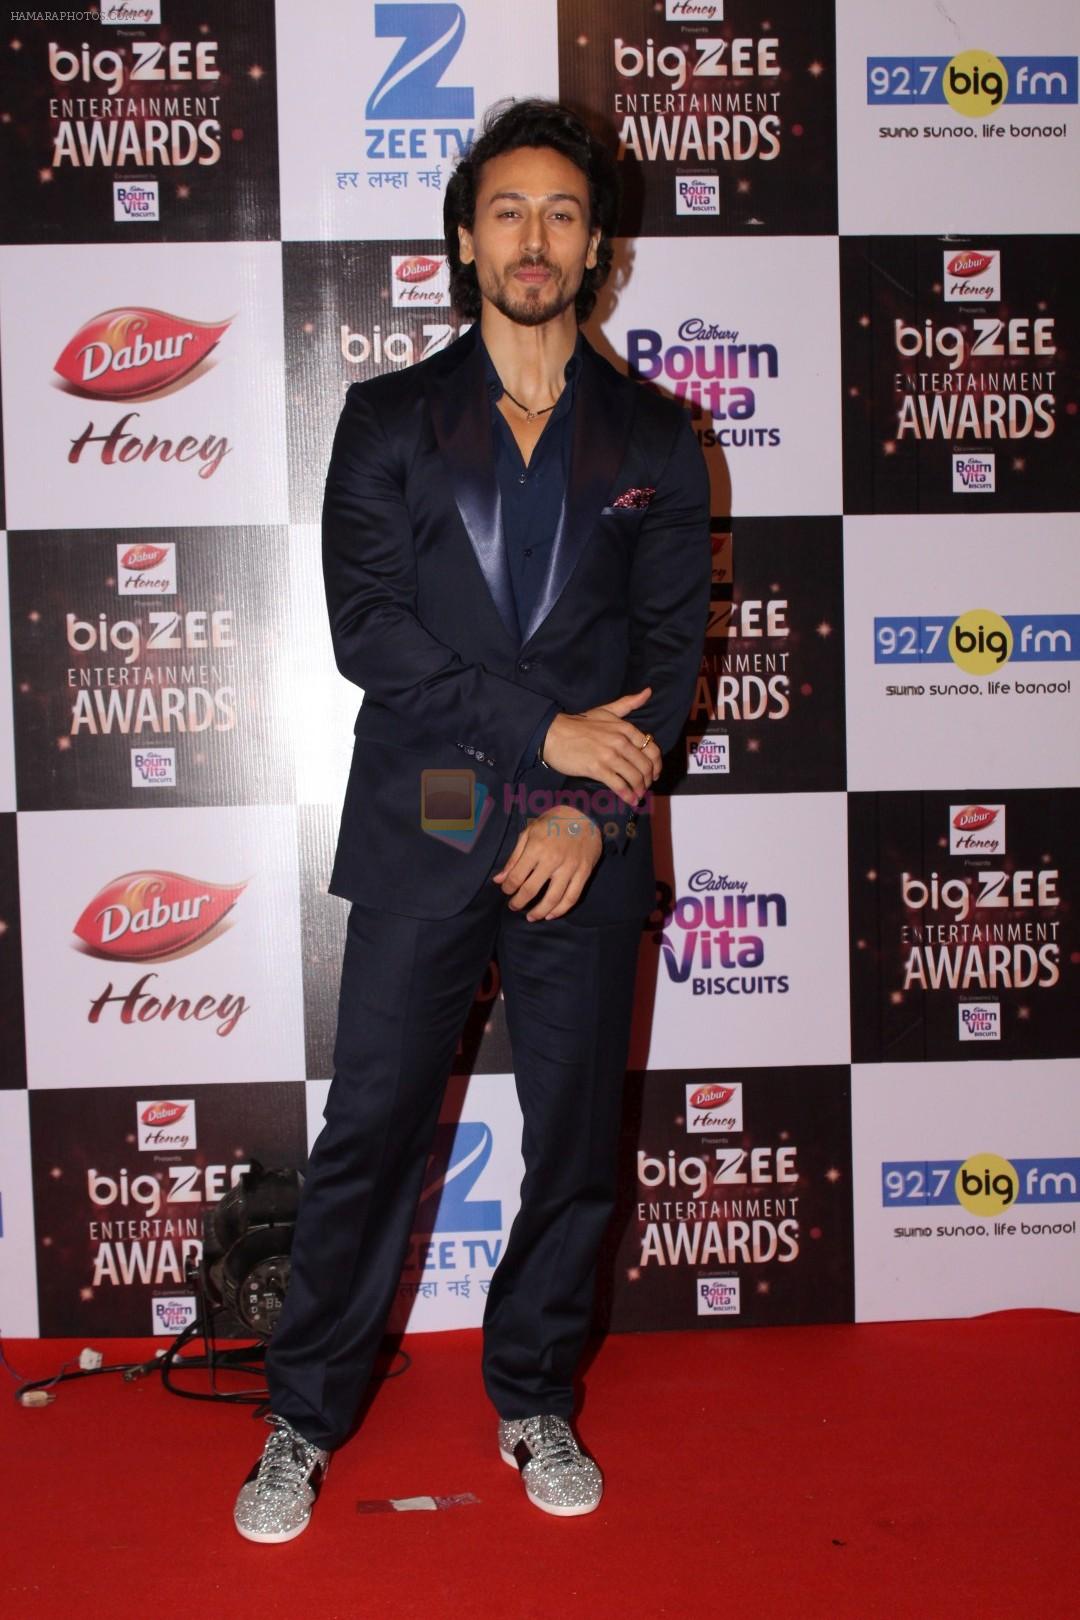 Tiger Shroff At Red Carpet Of Big Zee Entertainment Awards 2017 on 29th July 2017